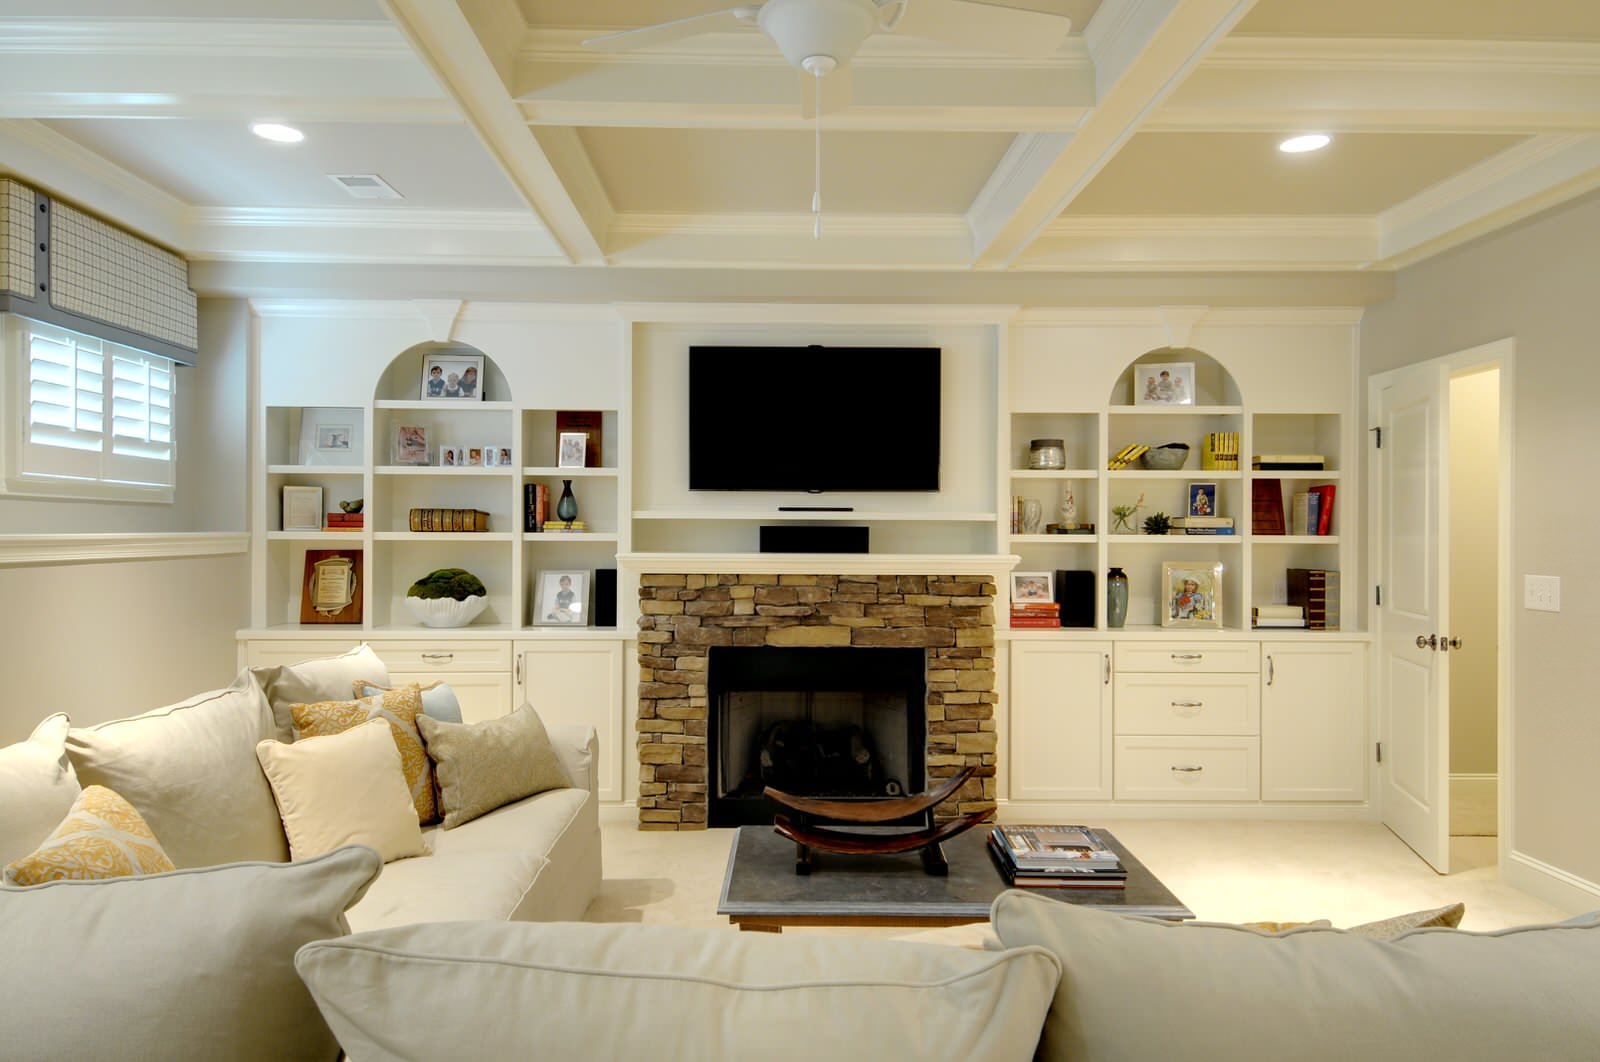 15 Most Elegant Built In Shelves Around, Bookcases Next To Stone Fireplace